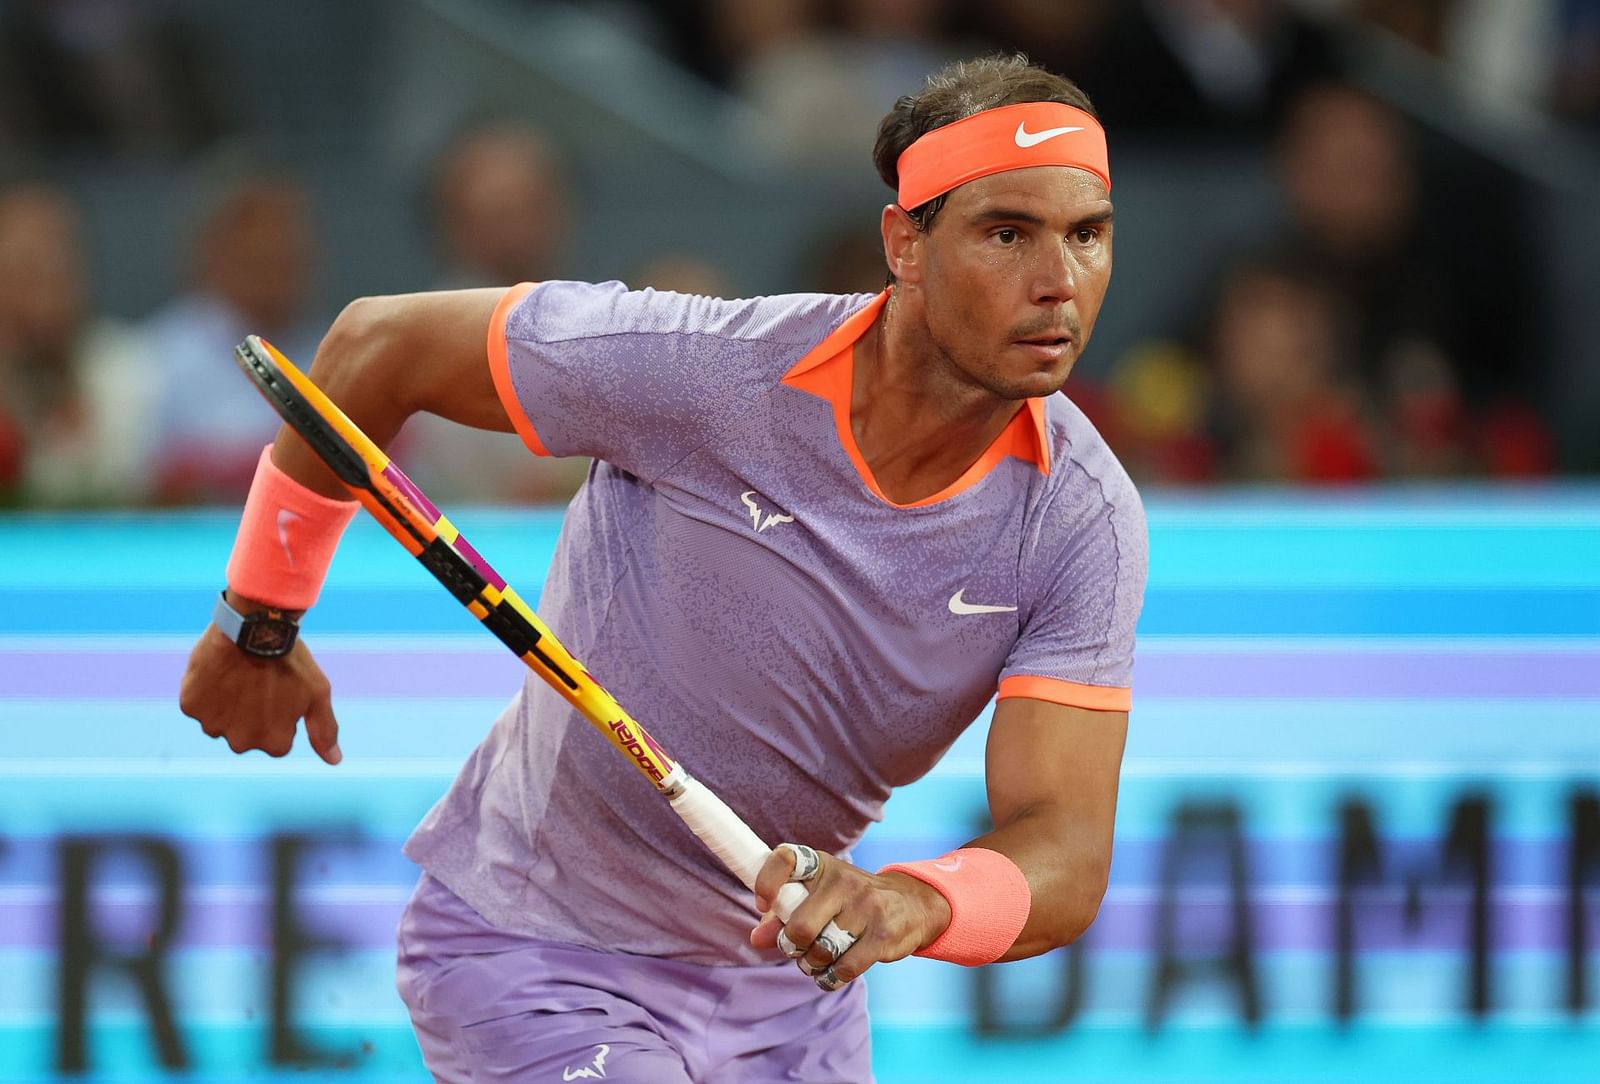 WATCH Rafael Nadal comes to the rescue of fan struggling to take a